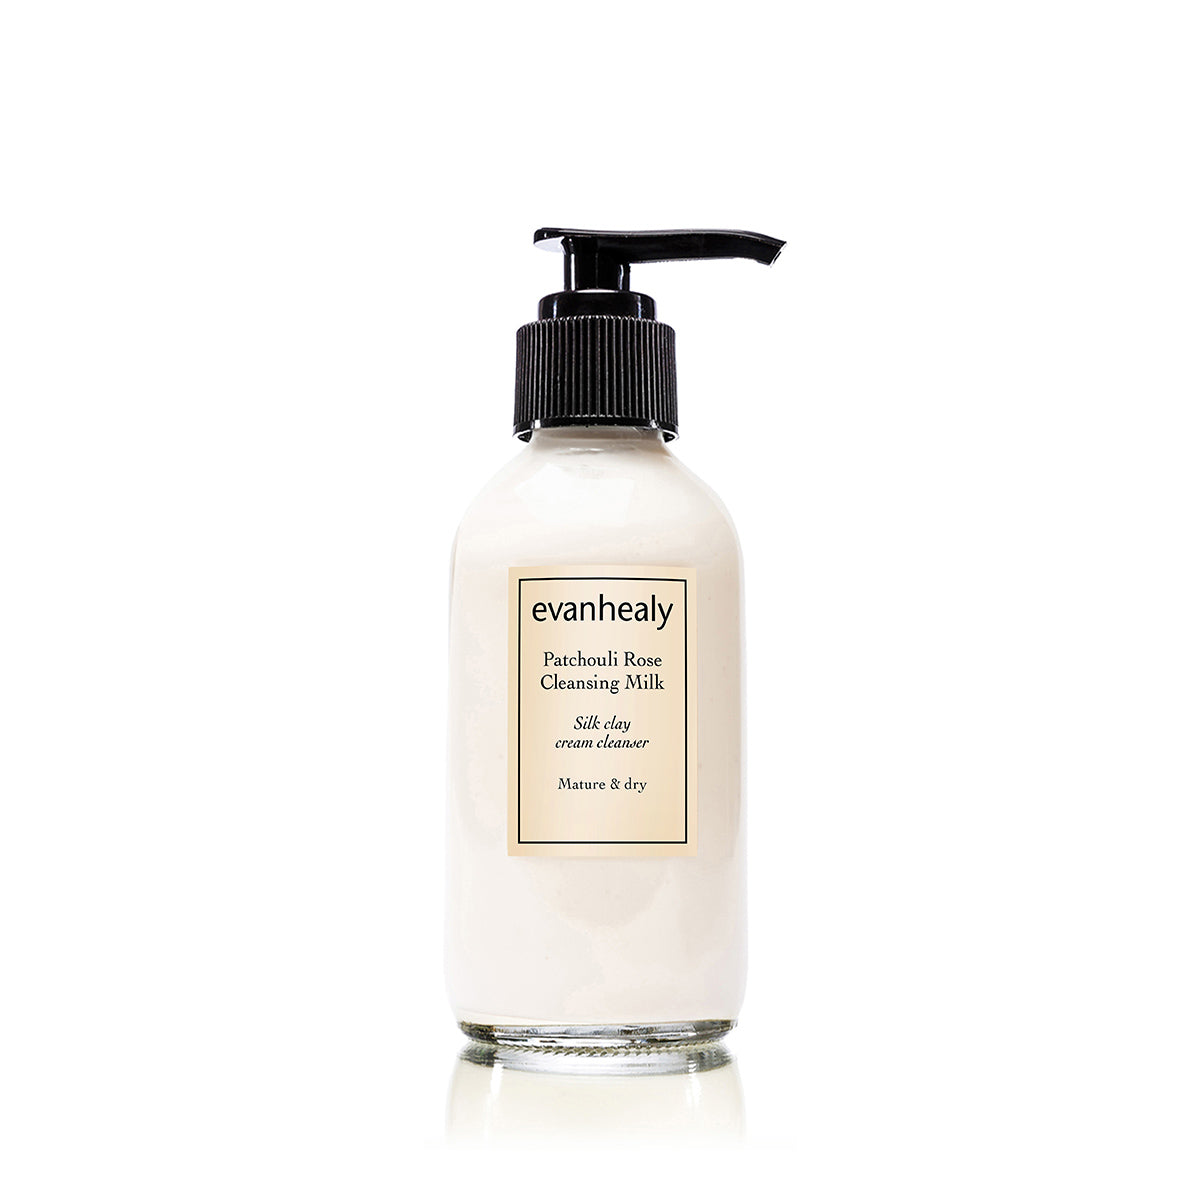 evanhealy patchouli rose cleansing milk cream face cleanser